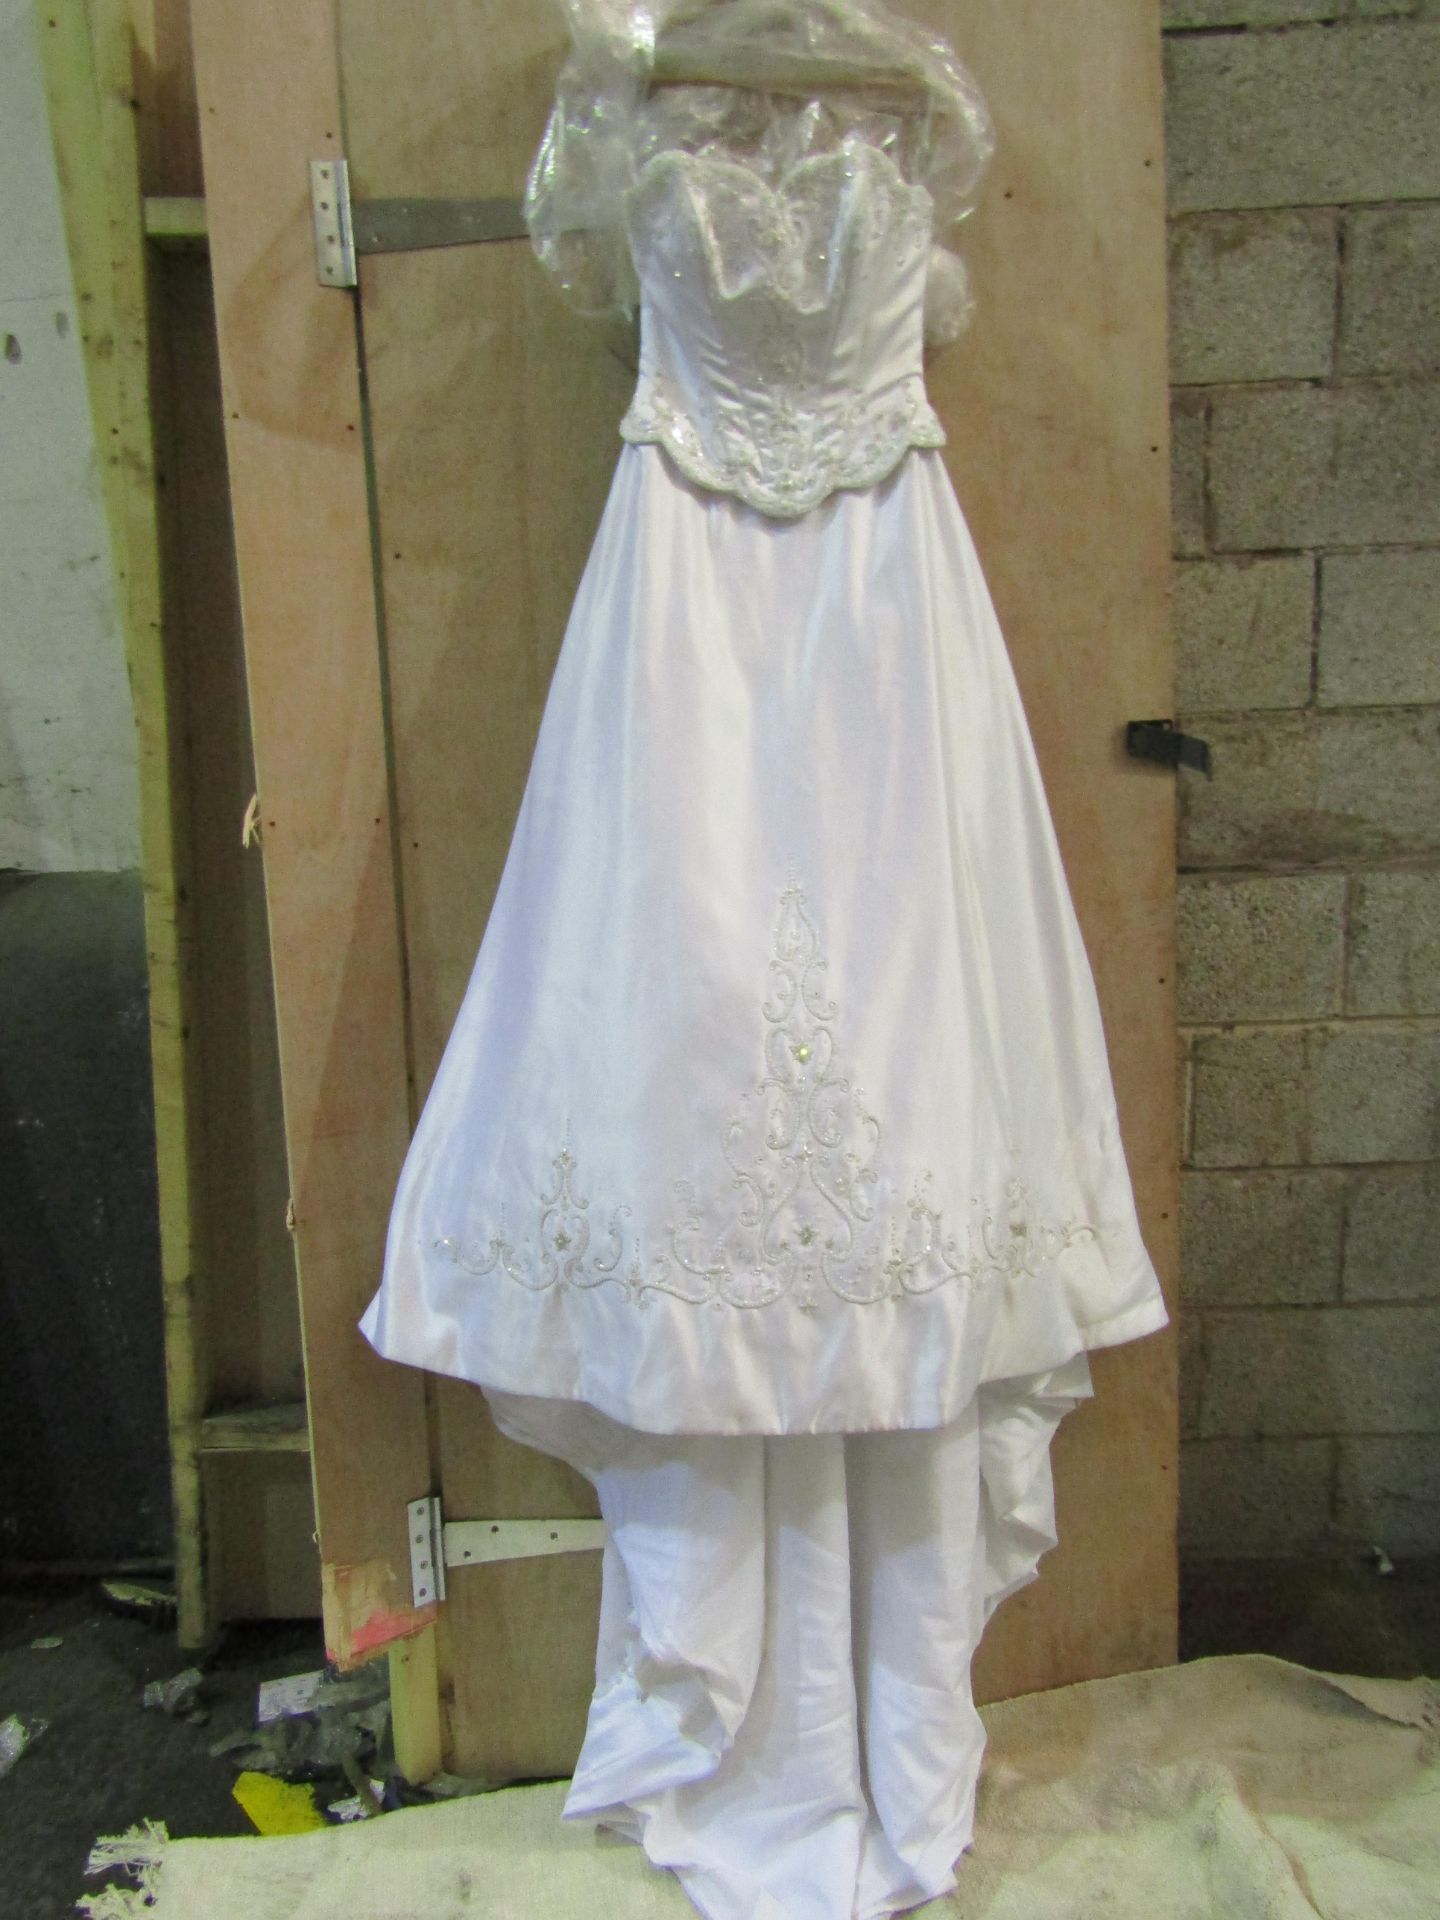 Approx 500 pieces of wedding shop stock to include wedding dresses, mother of the bride, dresses, - Image 103 of 108